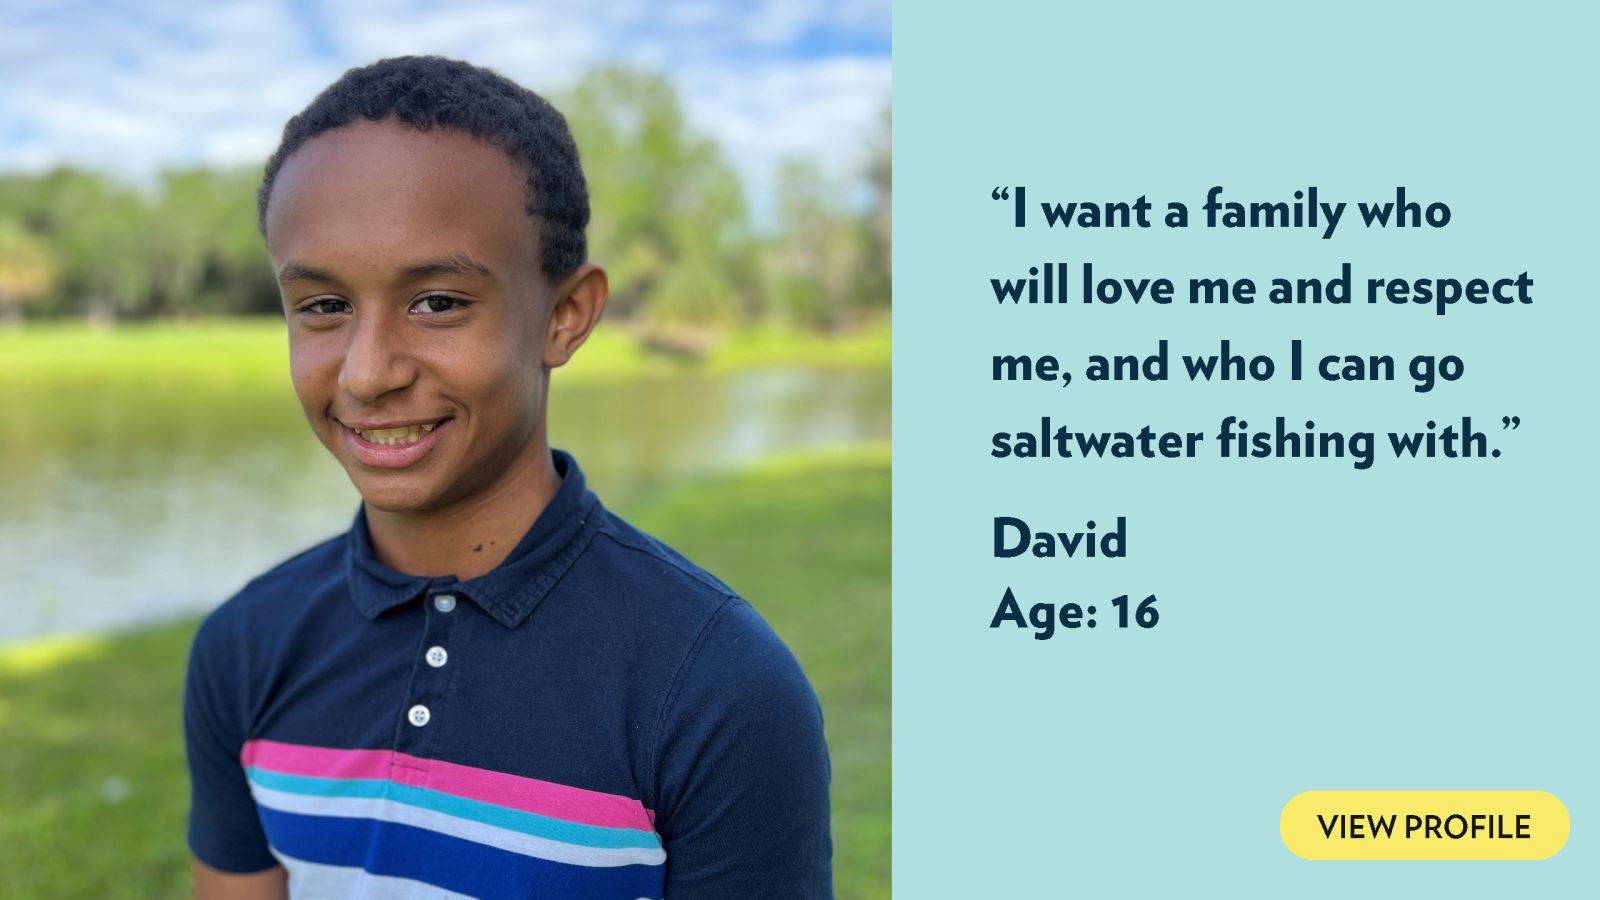 I want a family who will love me and respect me, and who I can go saltwater fishing with. David, age 16. View profile.